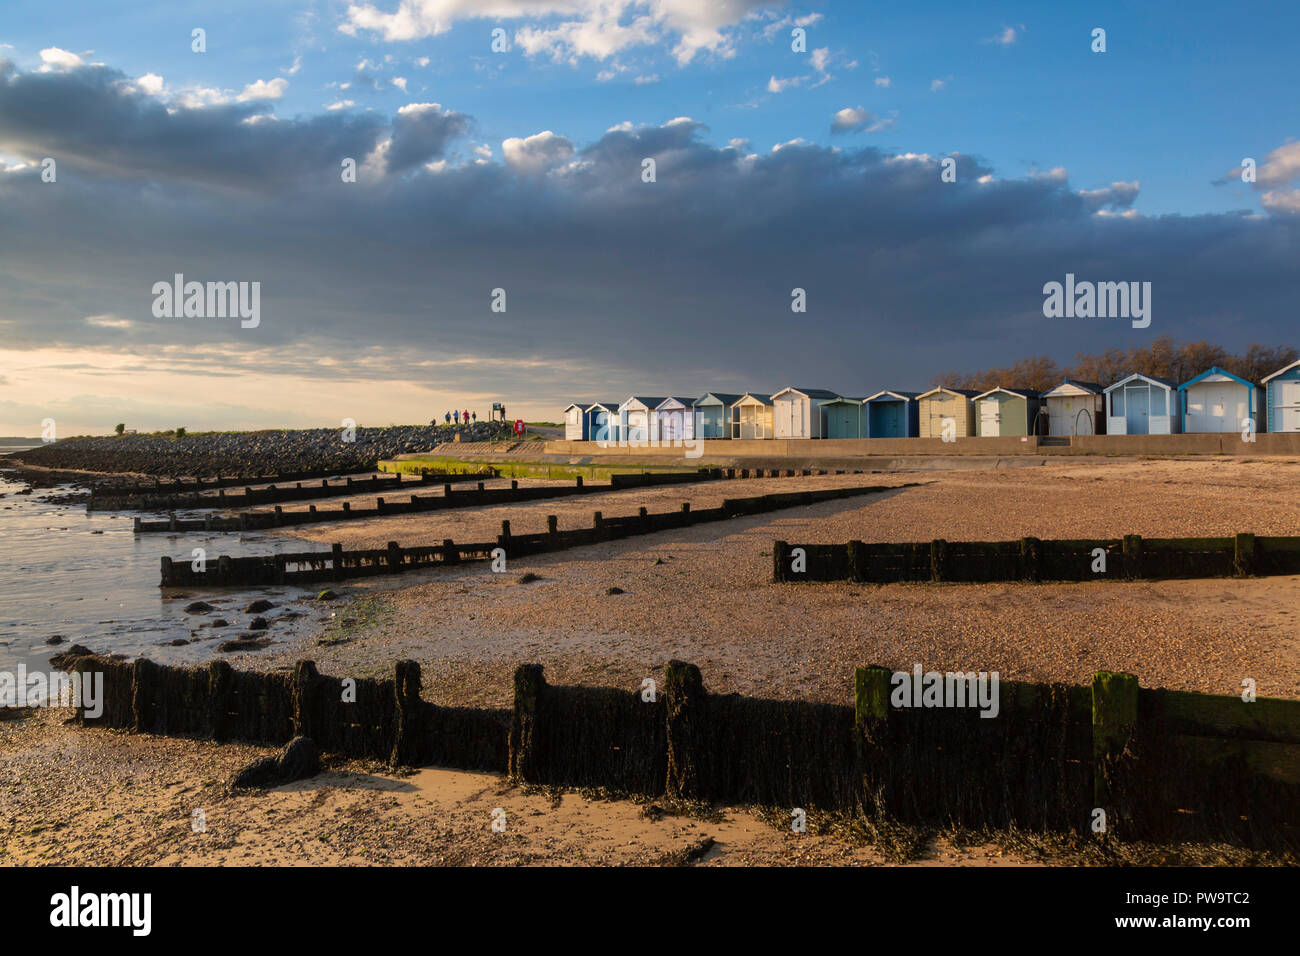 Beach huts and groynes on the shingle beach during pre-sunset dramatic light during Spring at Brightlingsea on the Essex coast, UK. Stock Photo